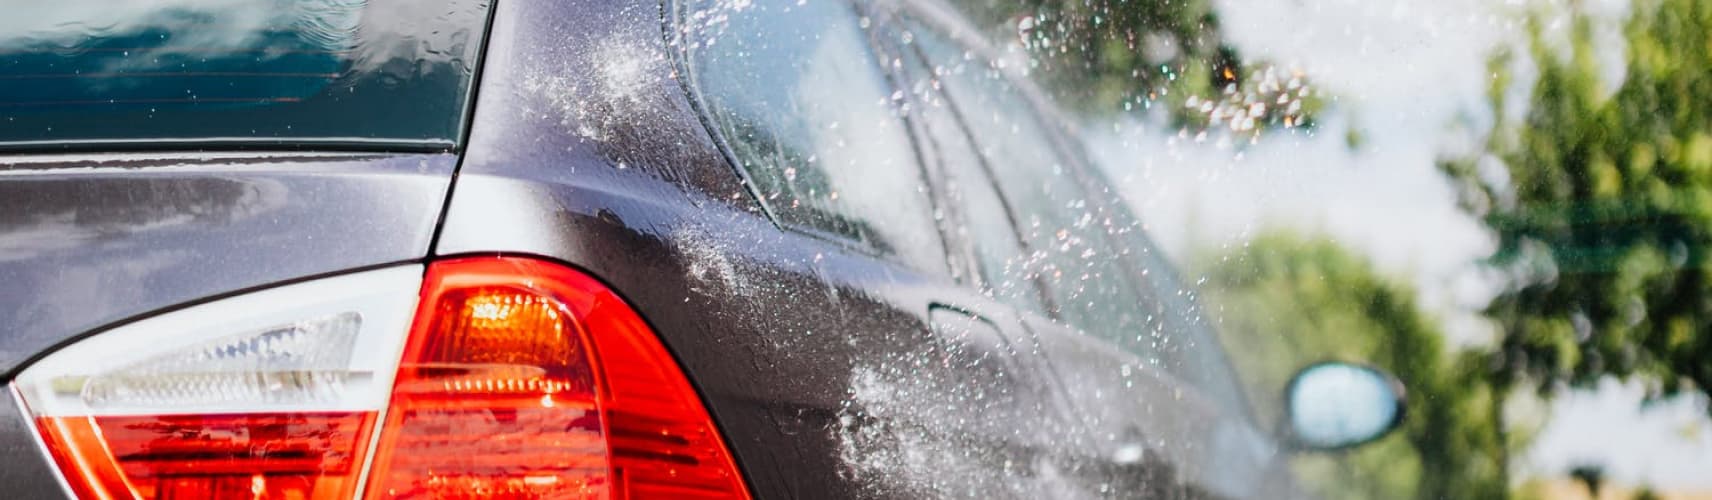 Must-Have Car Cleaning Supplies to Carry in Your Trunk 